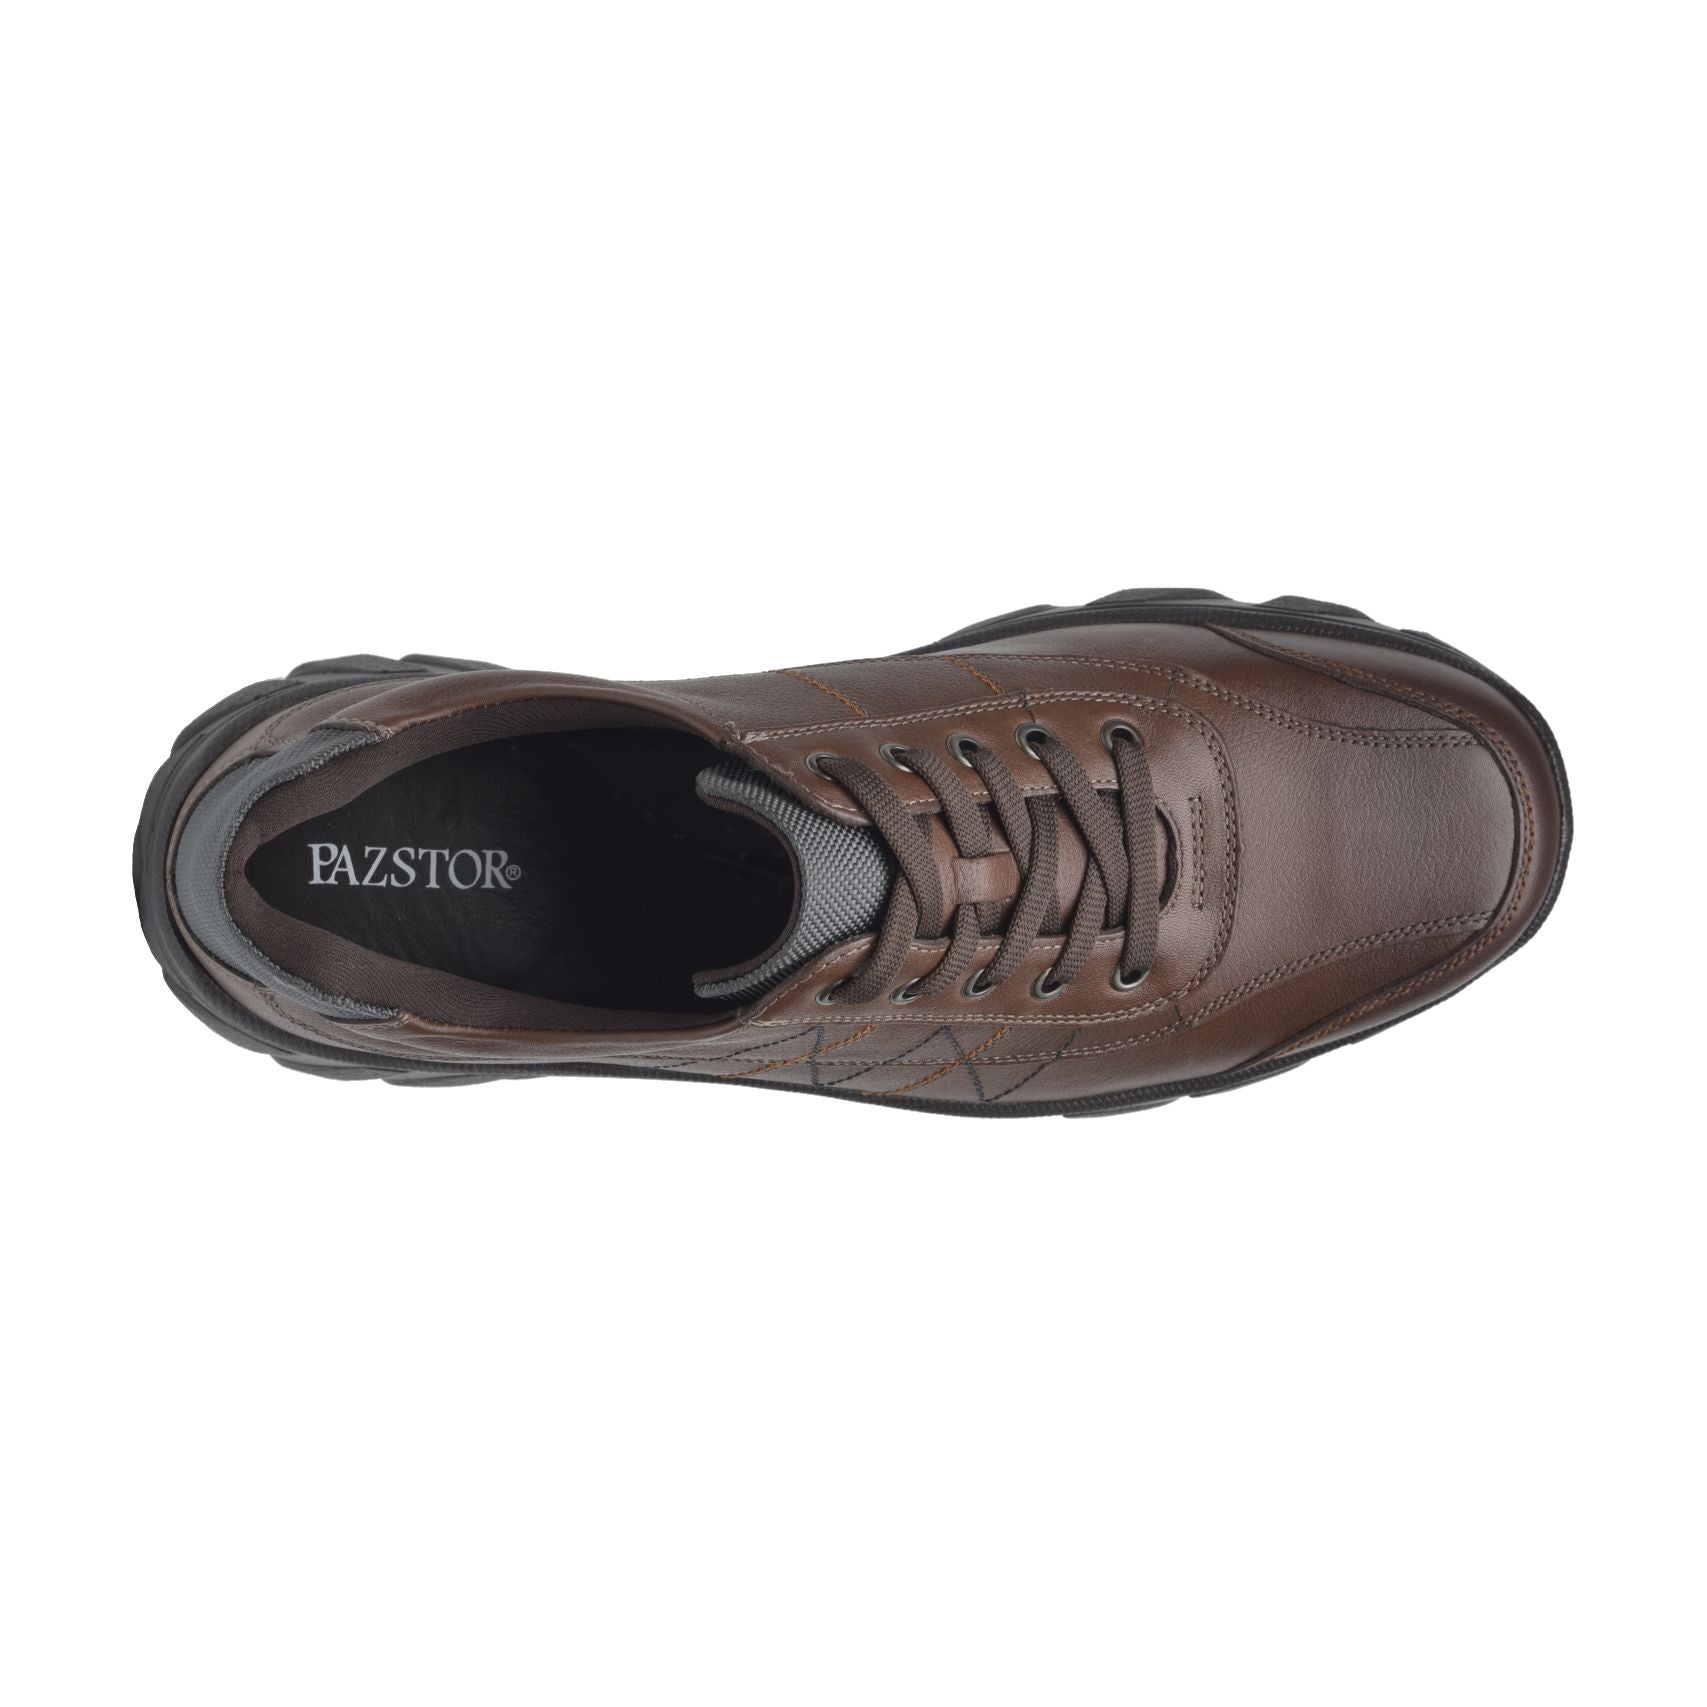 pazstor leather shoes